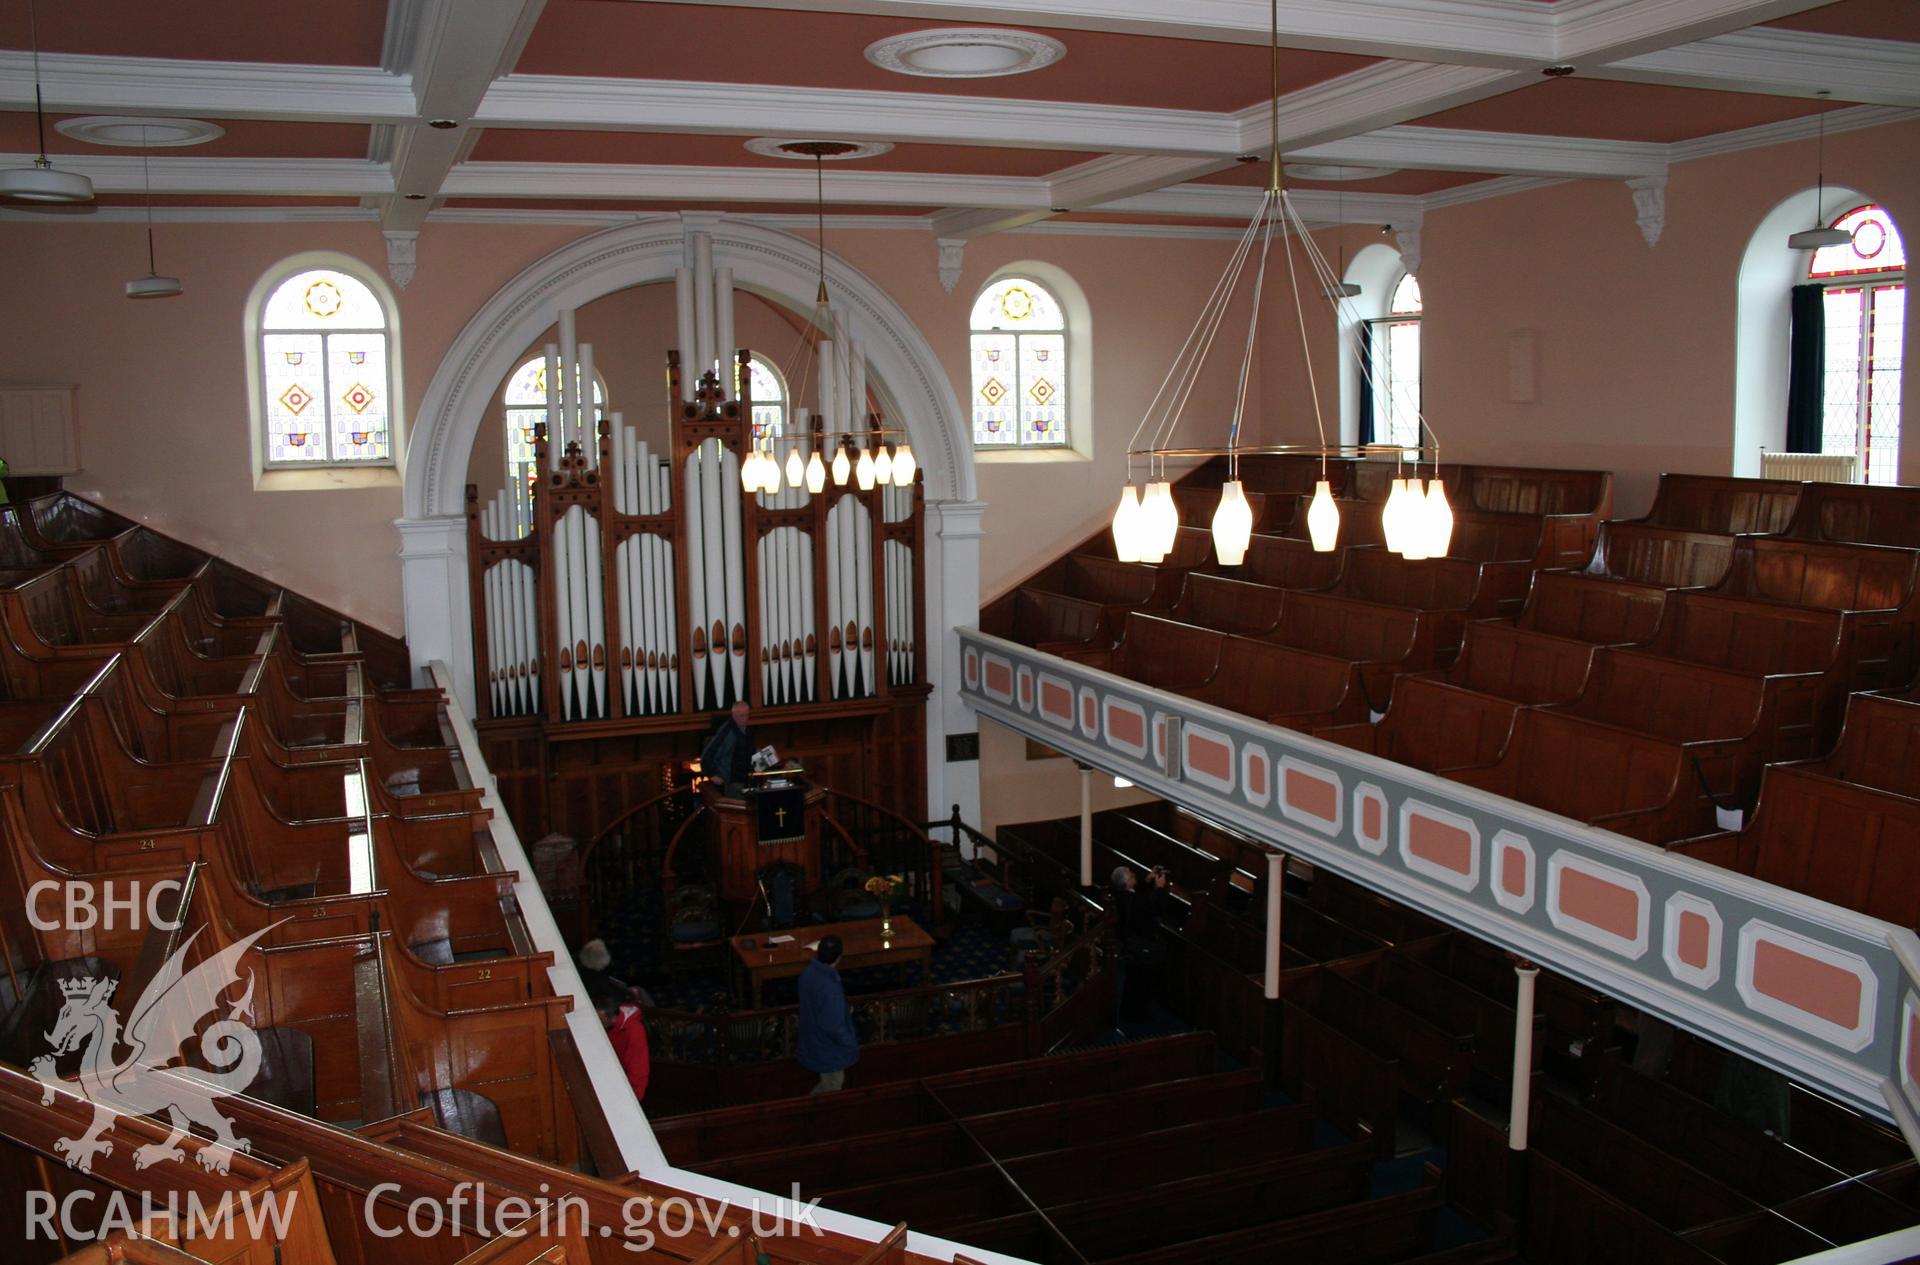 Interior, view towards organ & pulpit from gallery